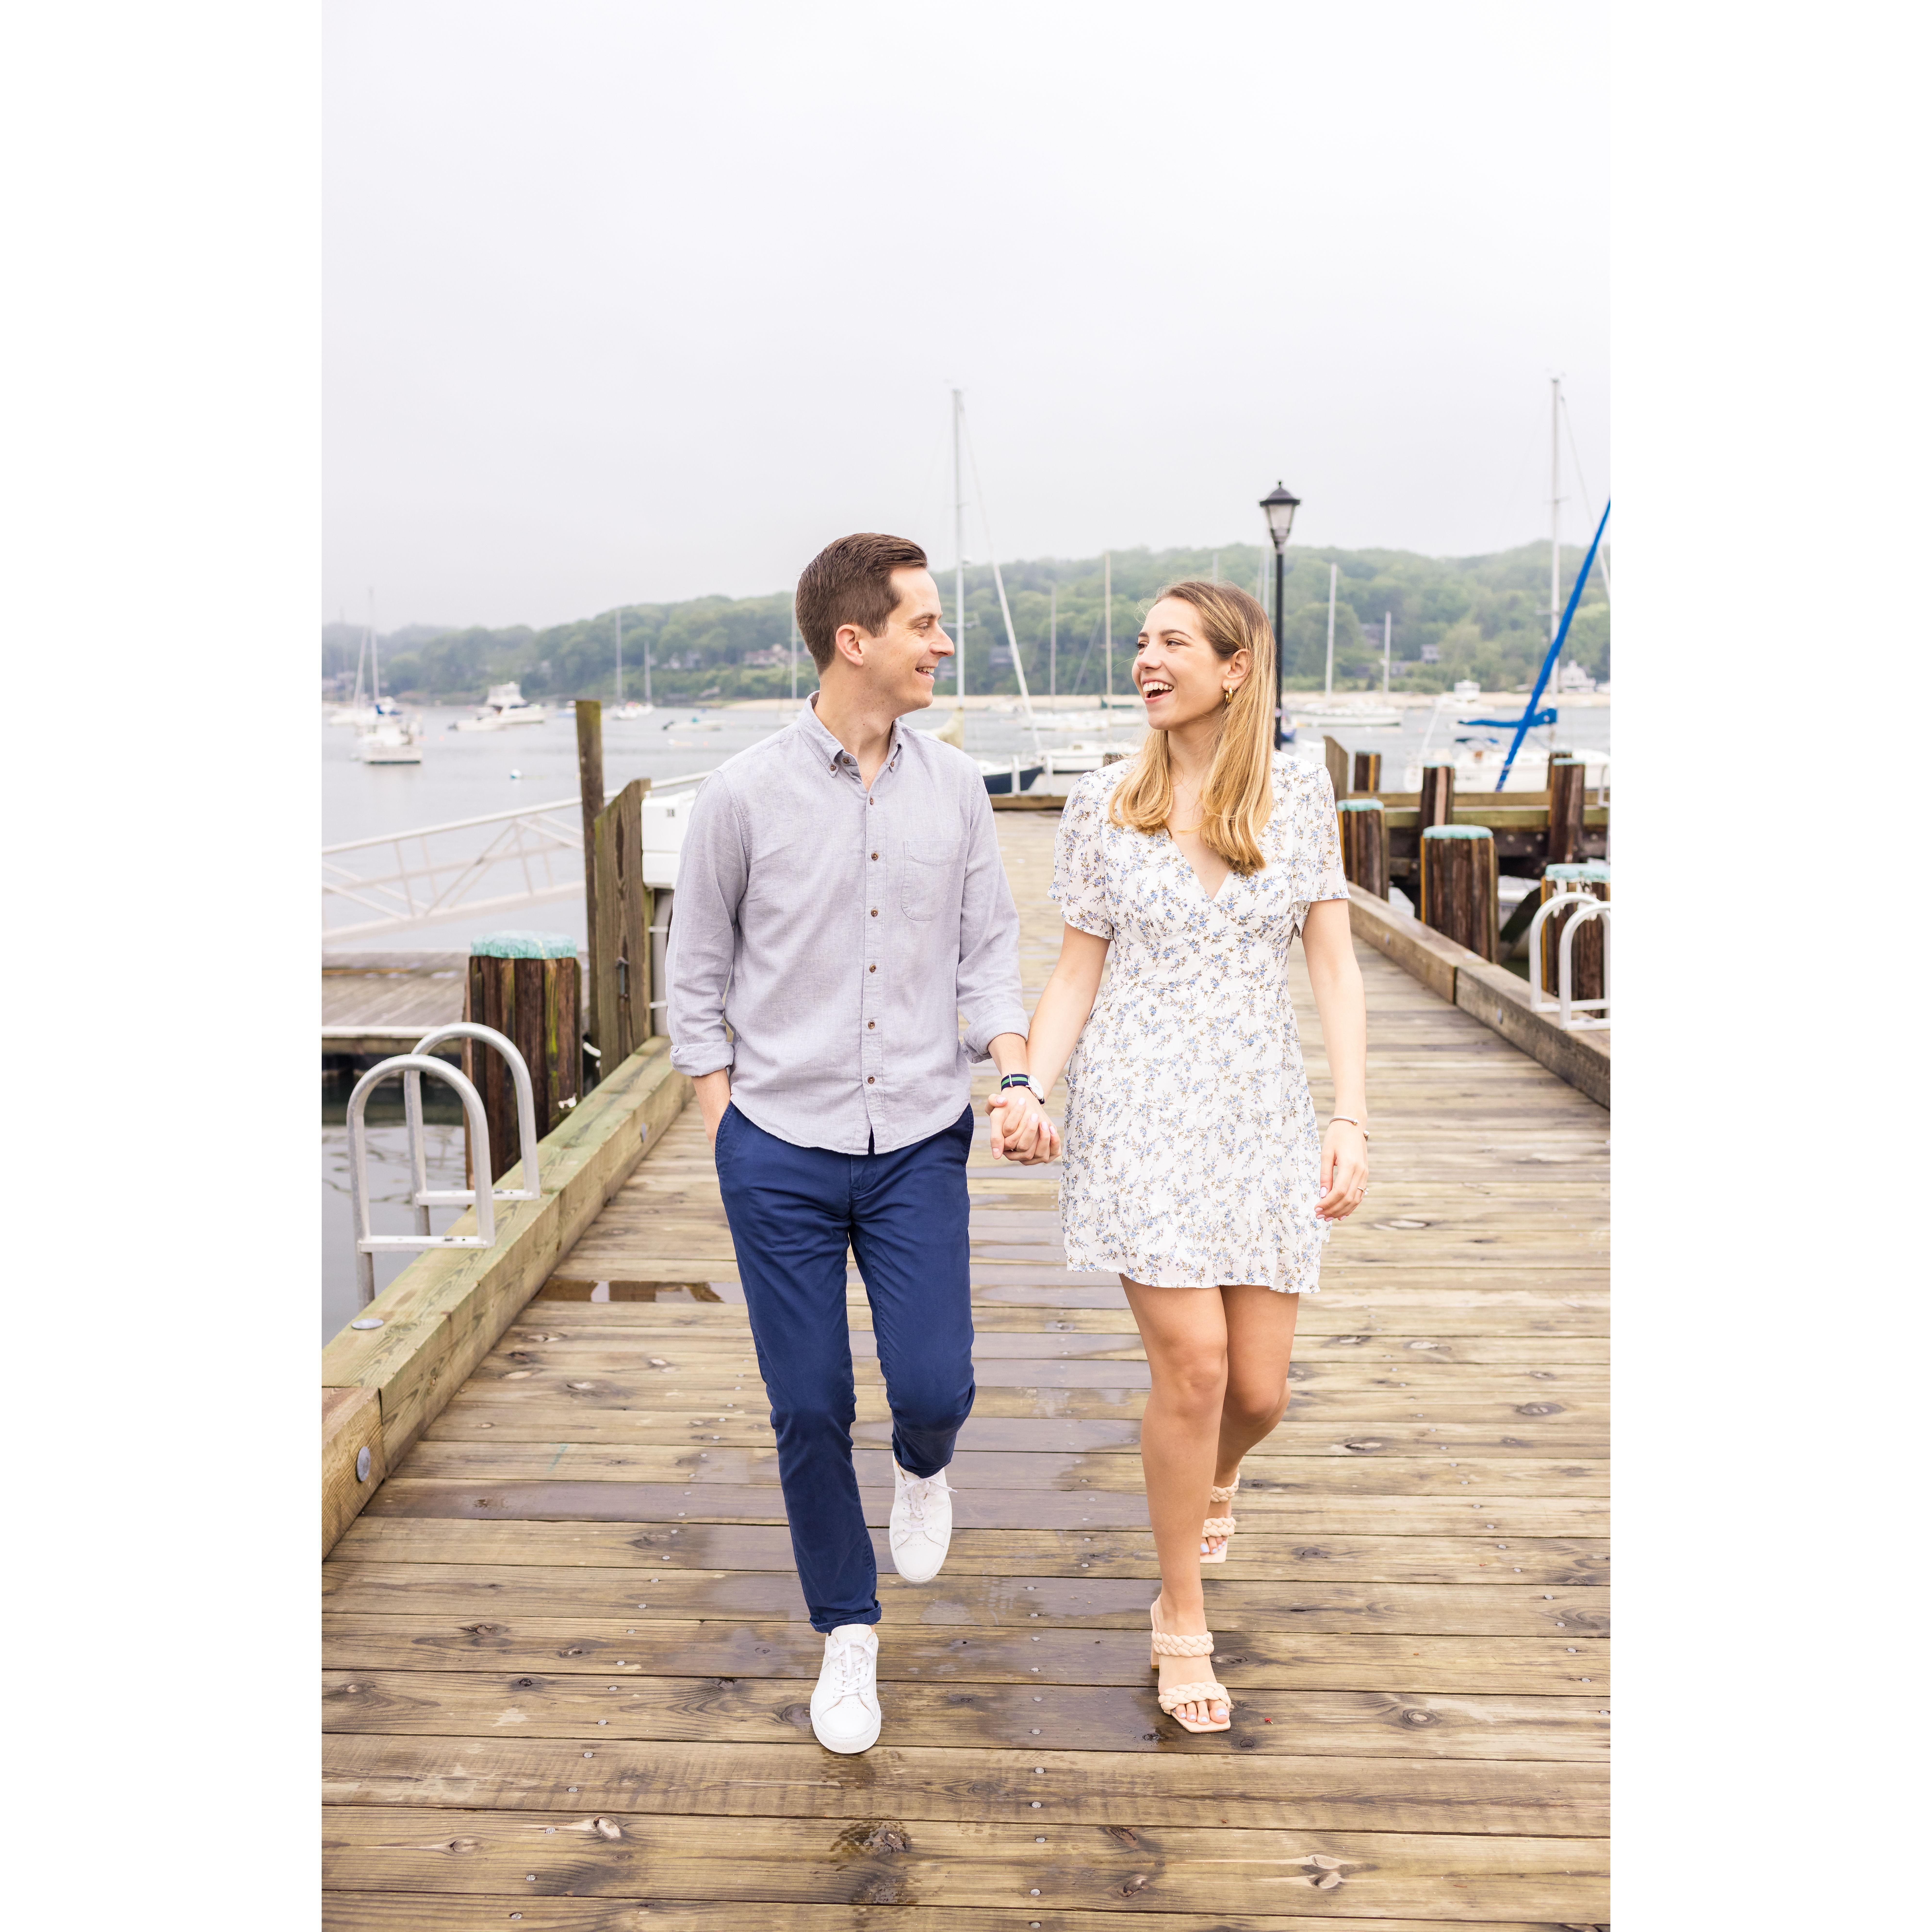 May 2022 - Engagement photos in Northport, NY - 5 minutes from our venue and 10 minutes from Huntington Village. A beautiful harbor town we recommend for its wine bar, breweries, and waterfront walks!